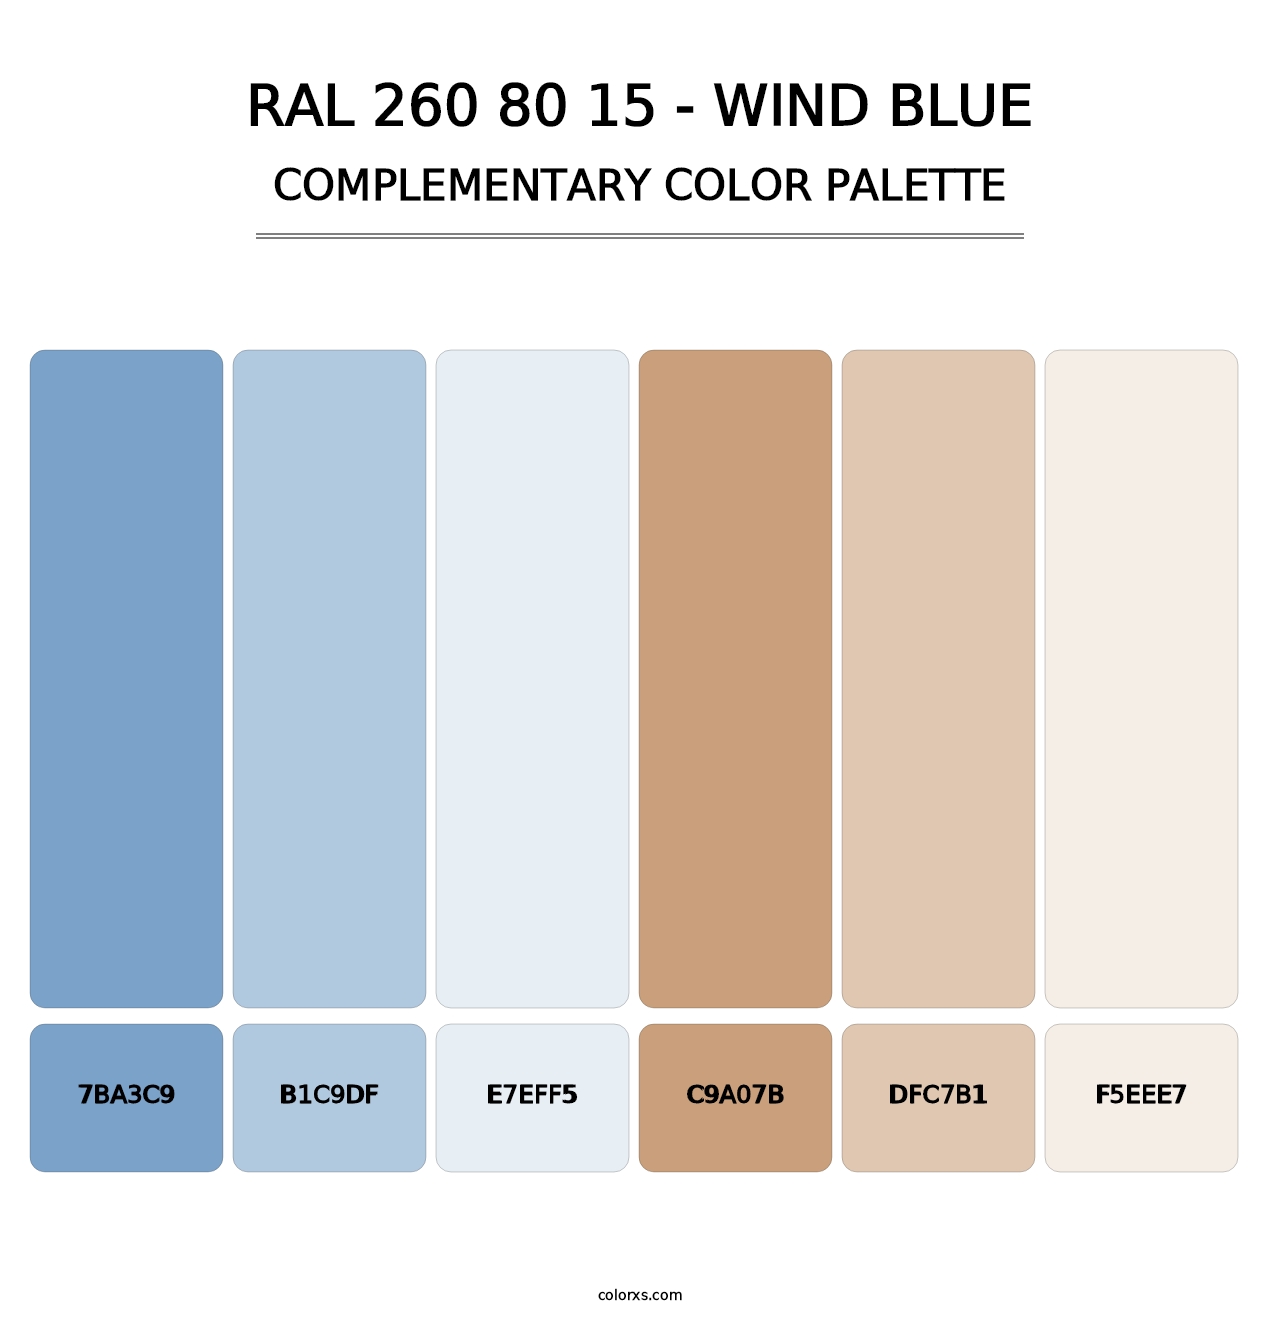 RAL 260 80 15 - Wind Blue - Complementary Color Palette